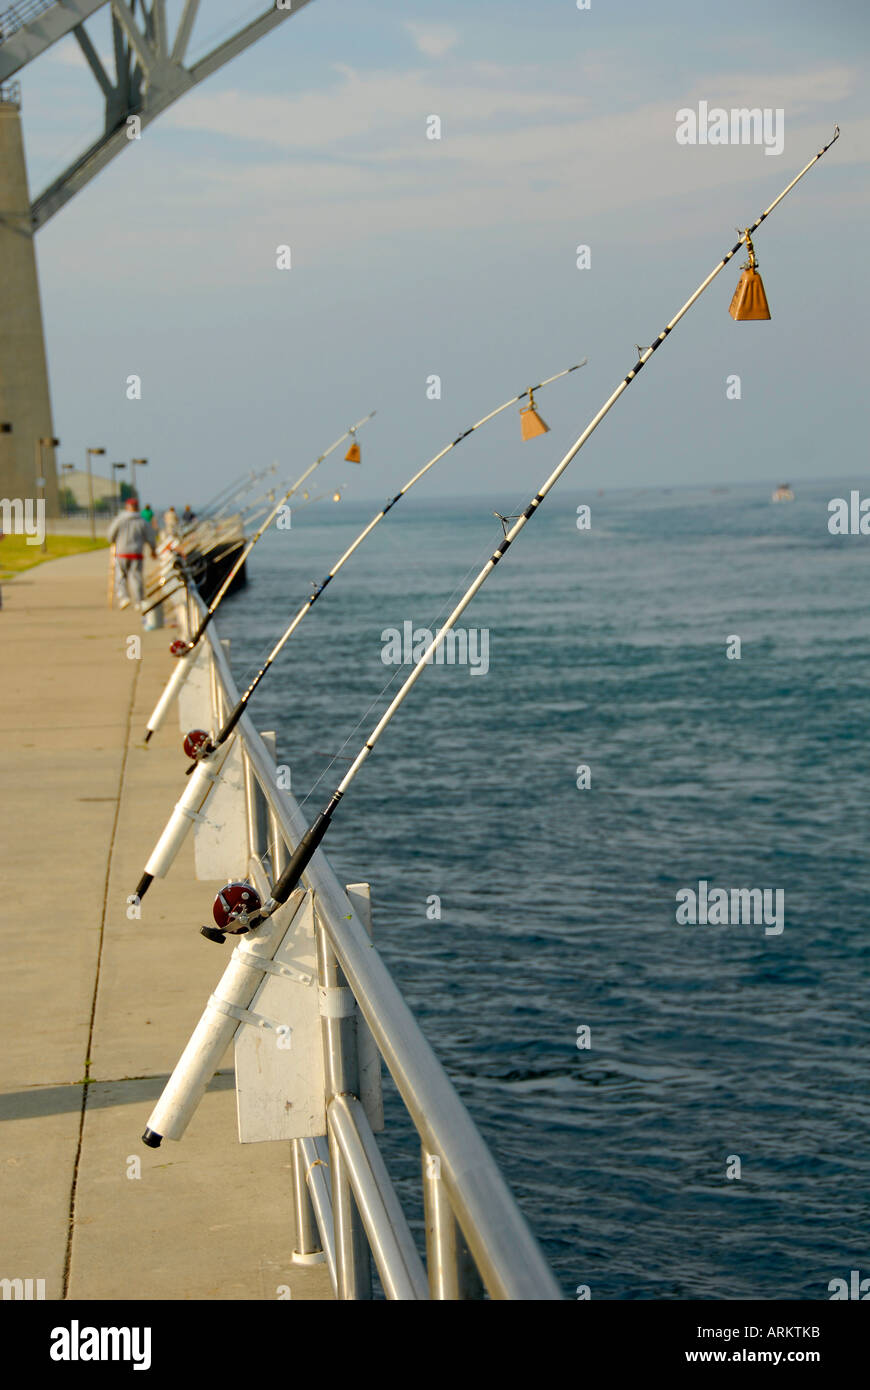 https://c8.alamy.com/comp/ARKTKB/bell-on-the-end-of-a-fishing-pole-alerts-the-fisherman-of-a-strike-ARKTKB.jpg